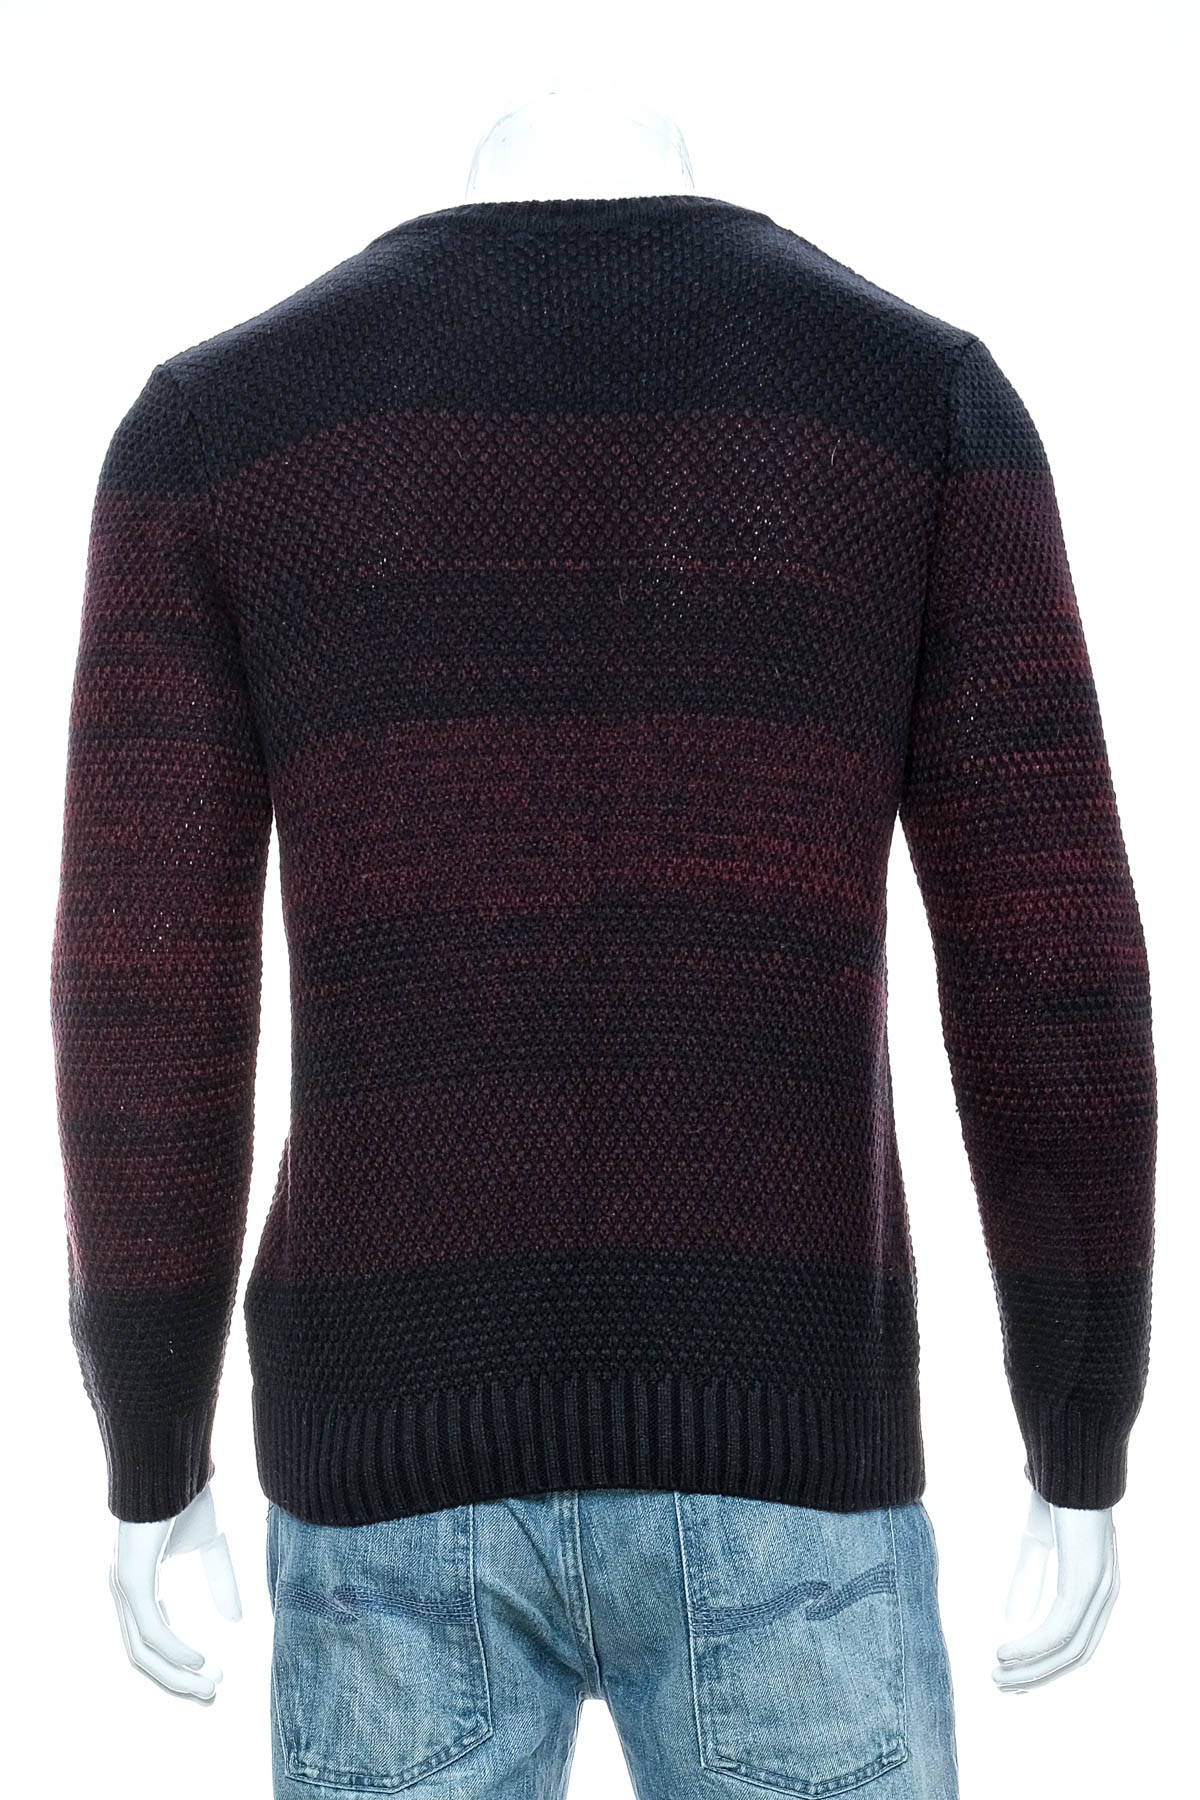 Men's sweater - LCW Casual - 1